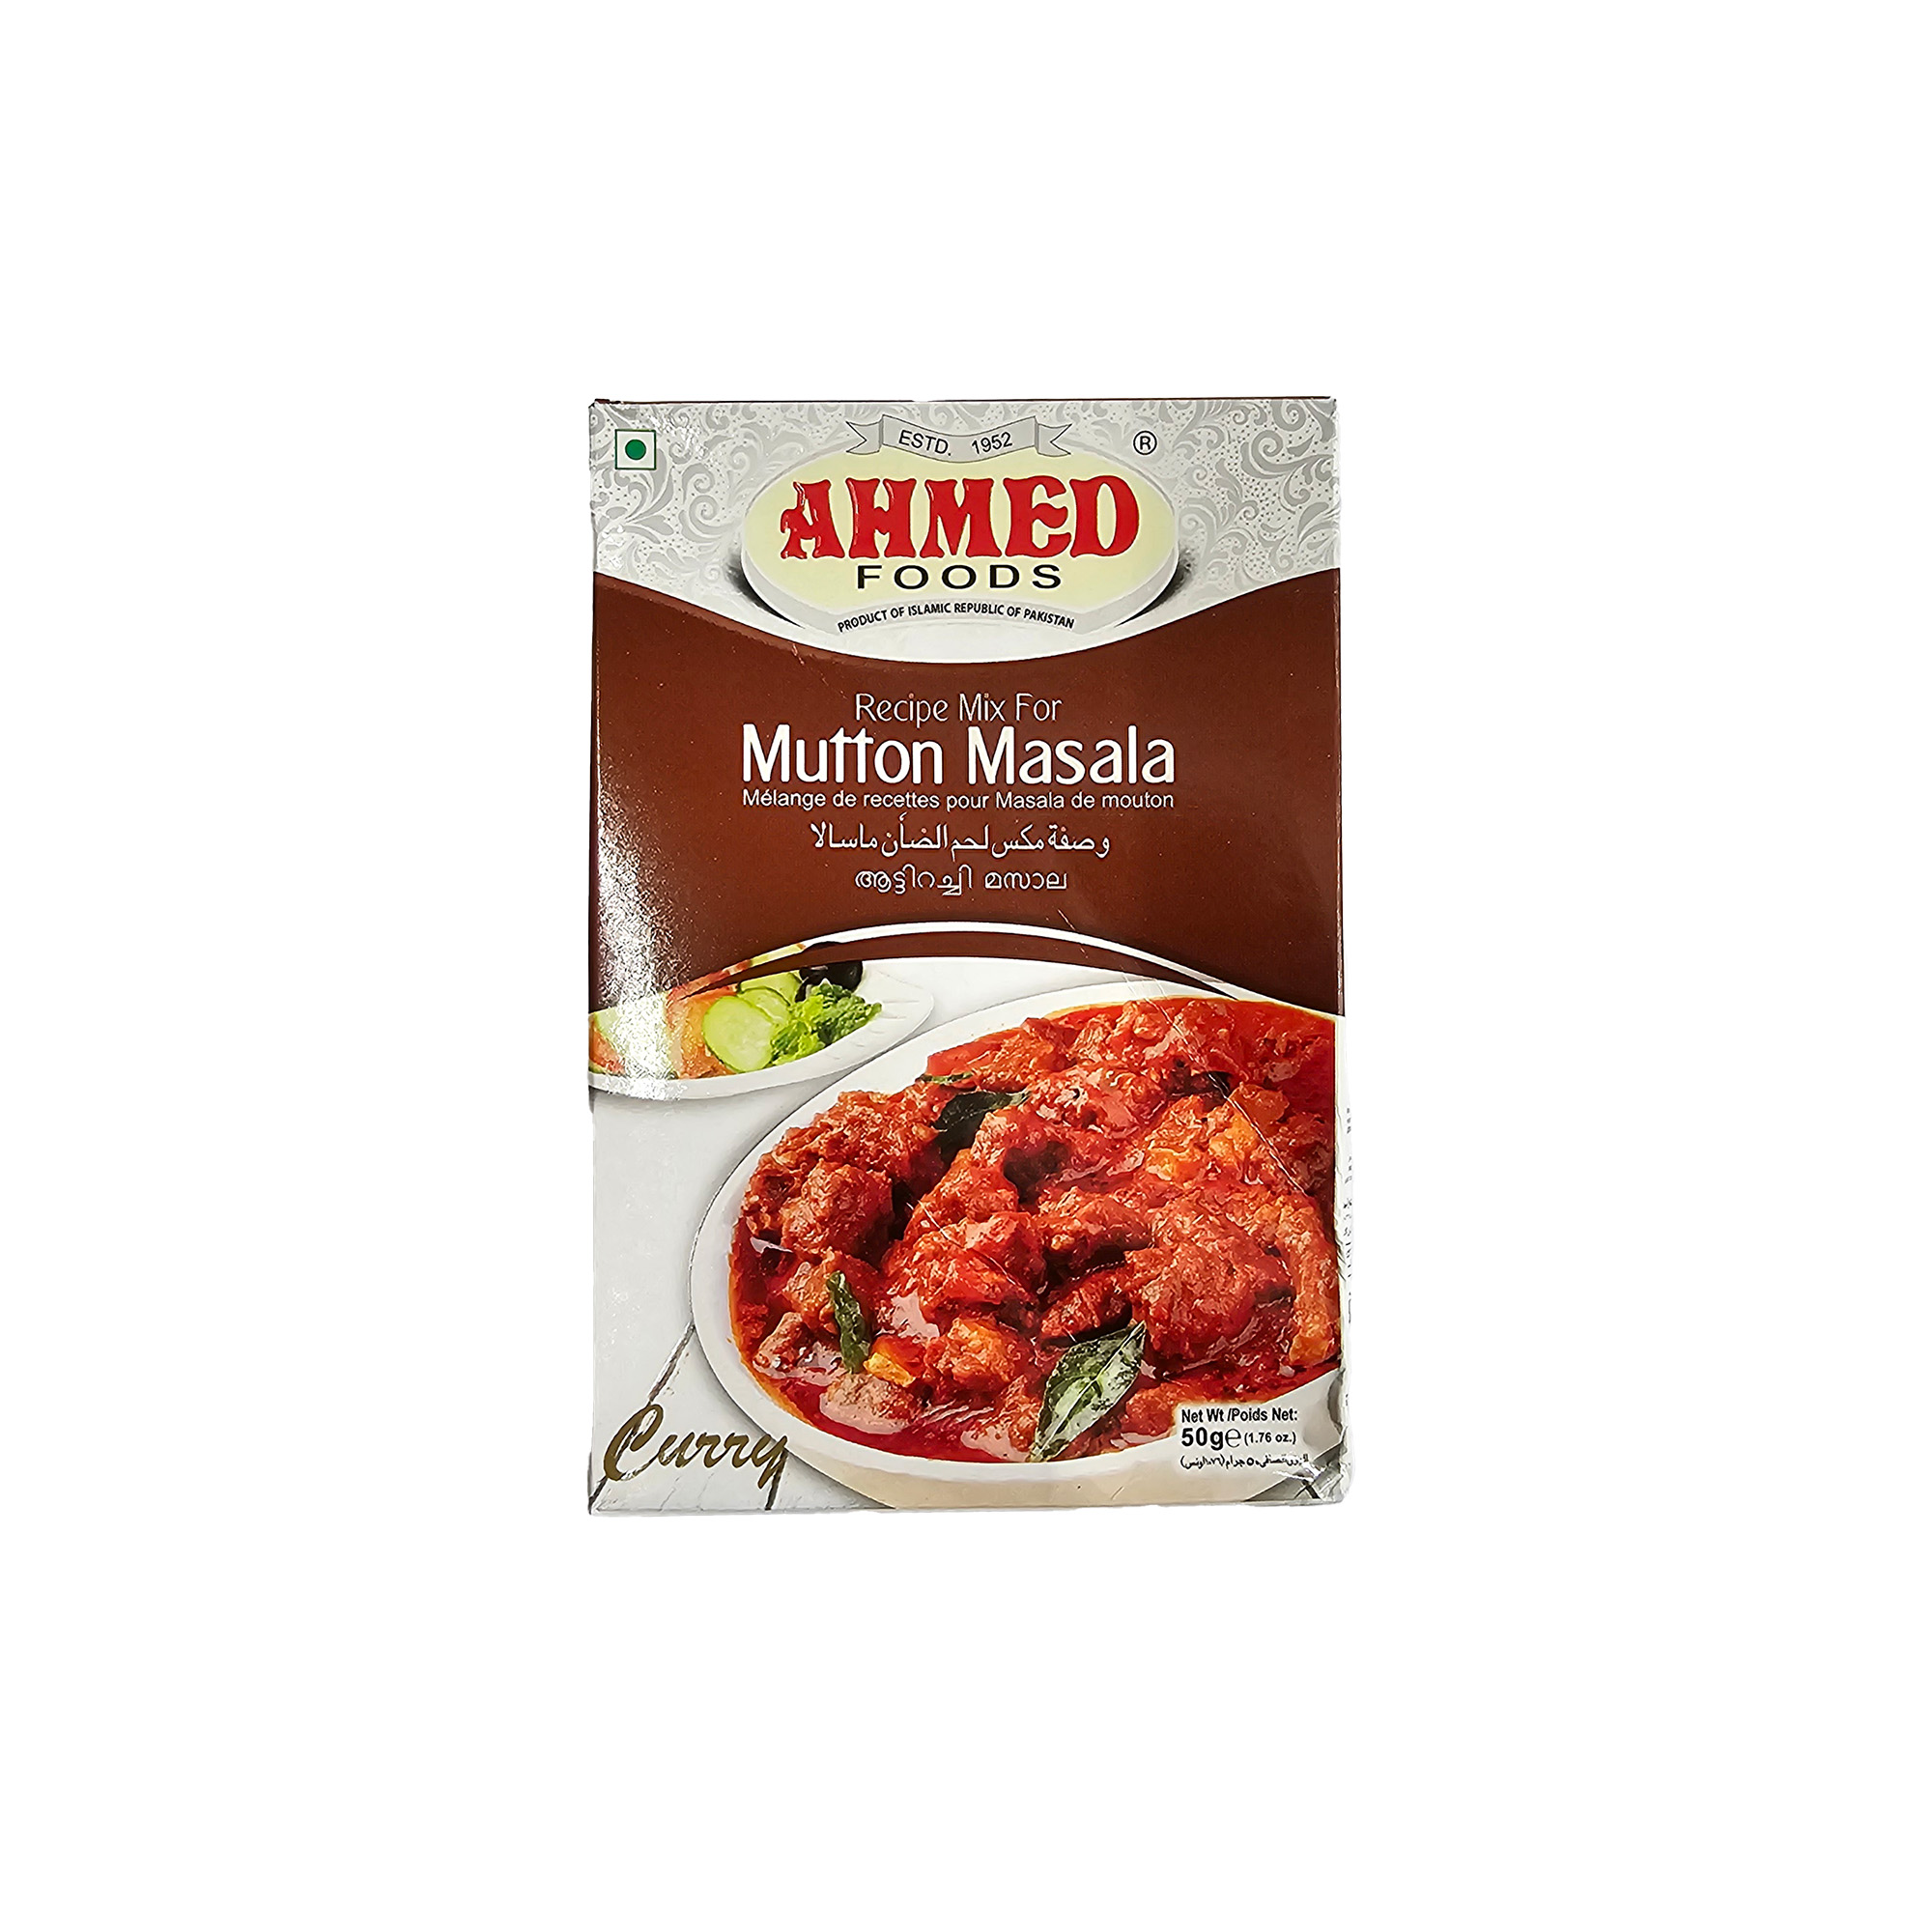 Mutton Masala [AHMED FOODS]